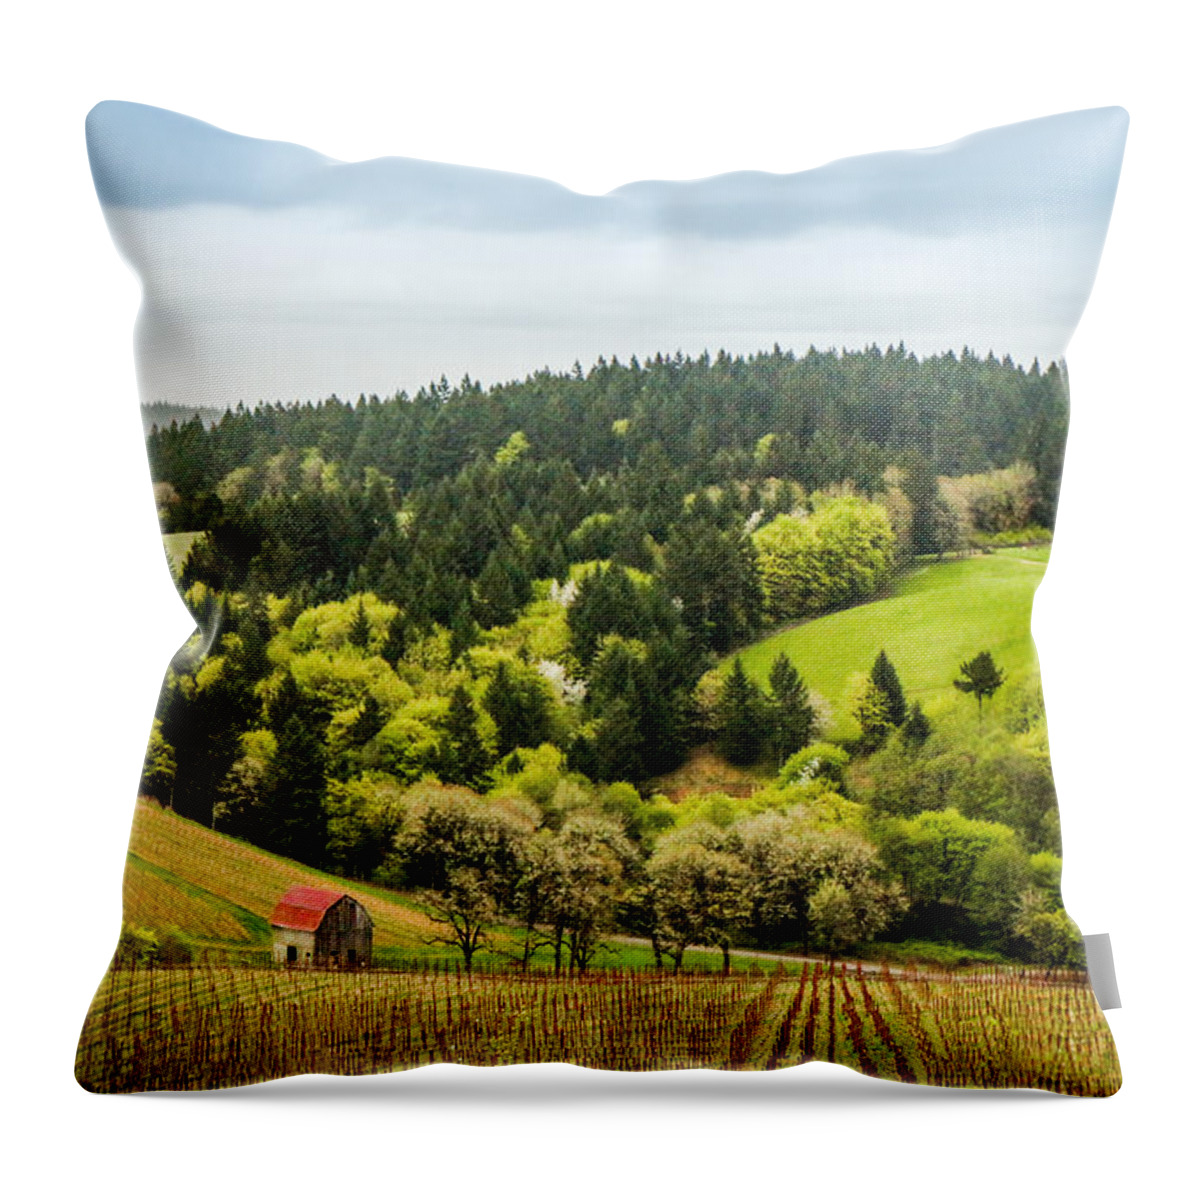 Oregon Throw Pillow featuring the photograph Oregon Wine Country by TK Goforth